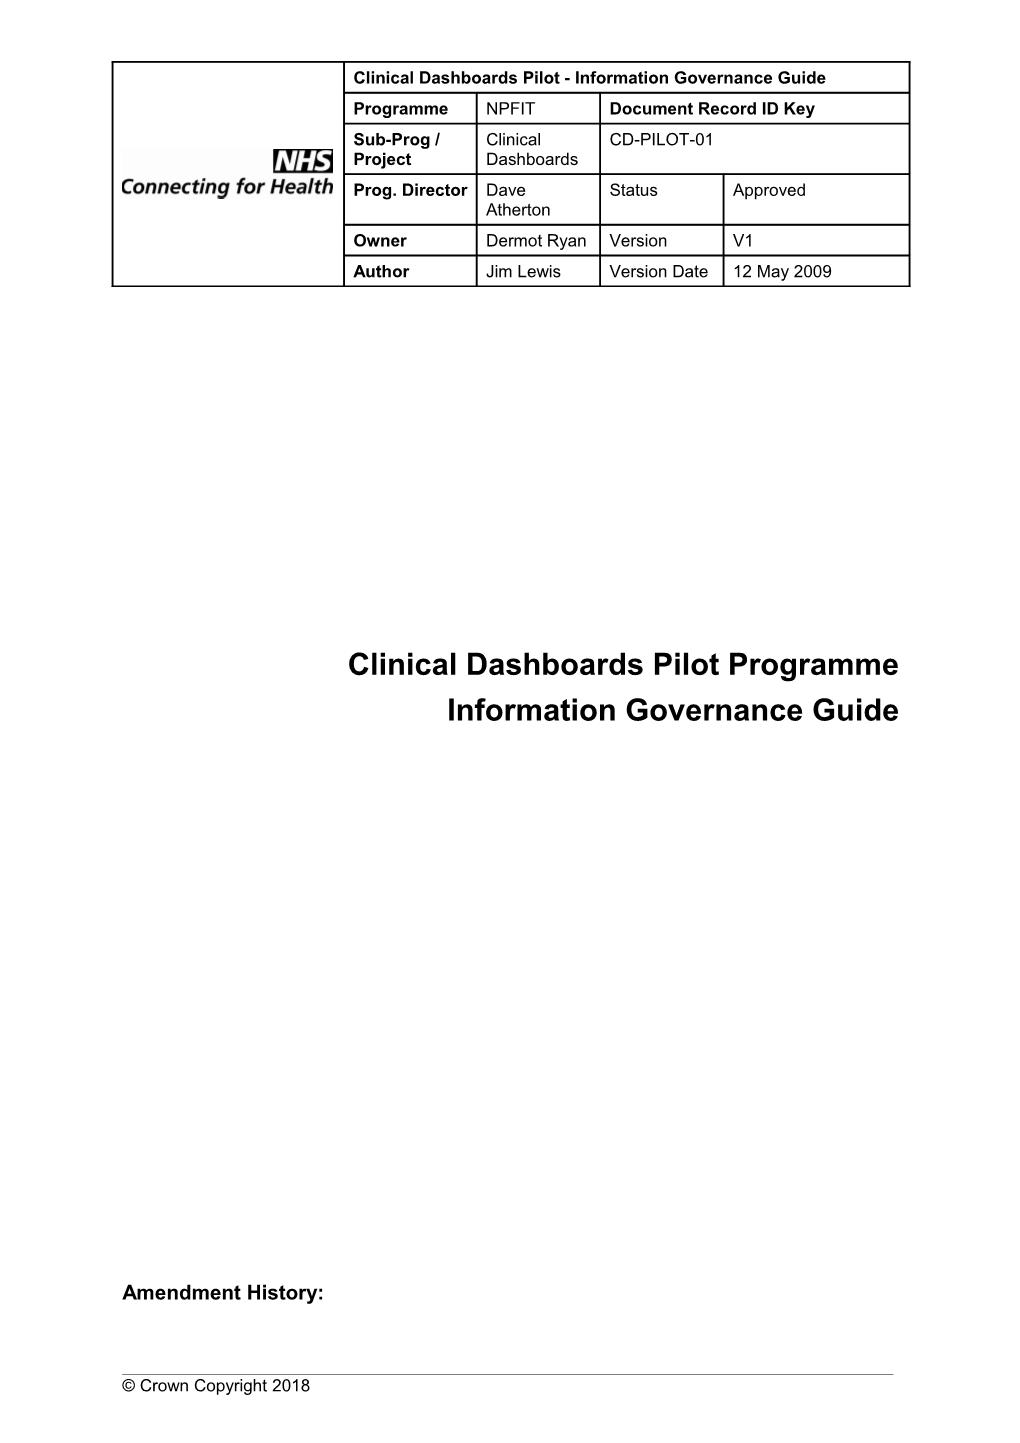 Clinical Dashboards Pilot - Information Governance Guide